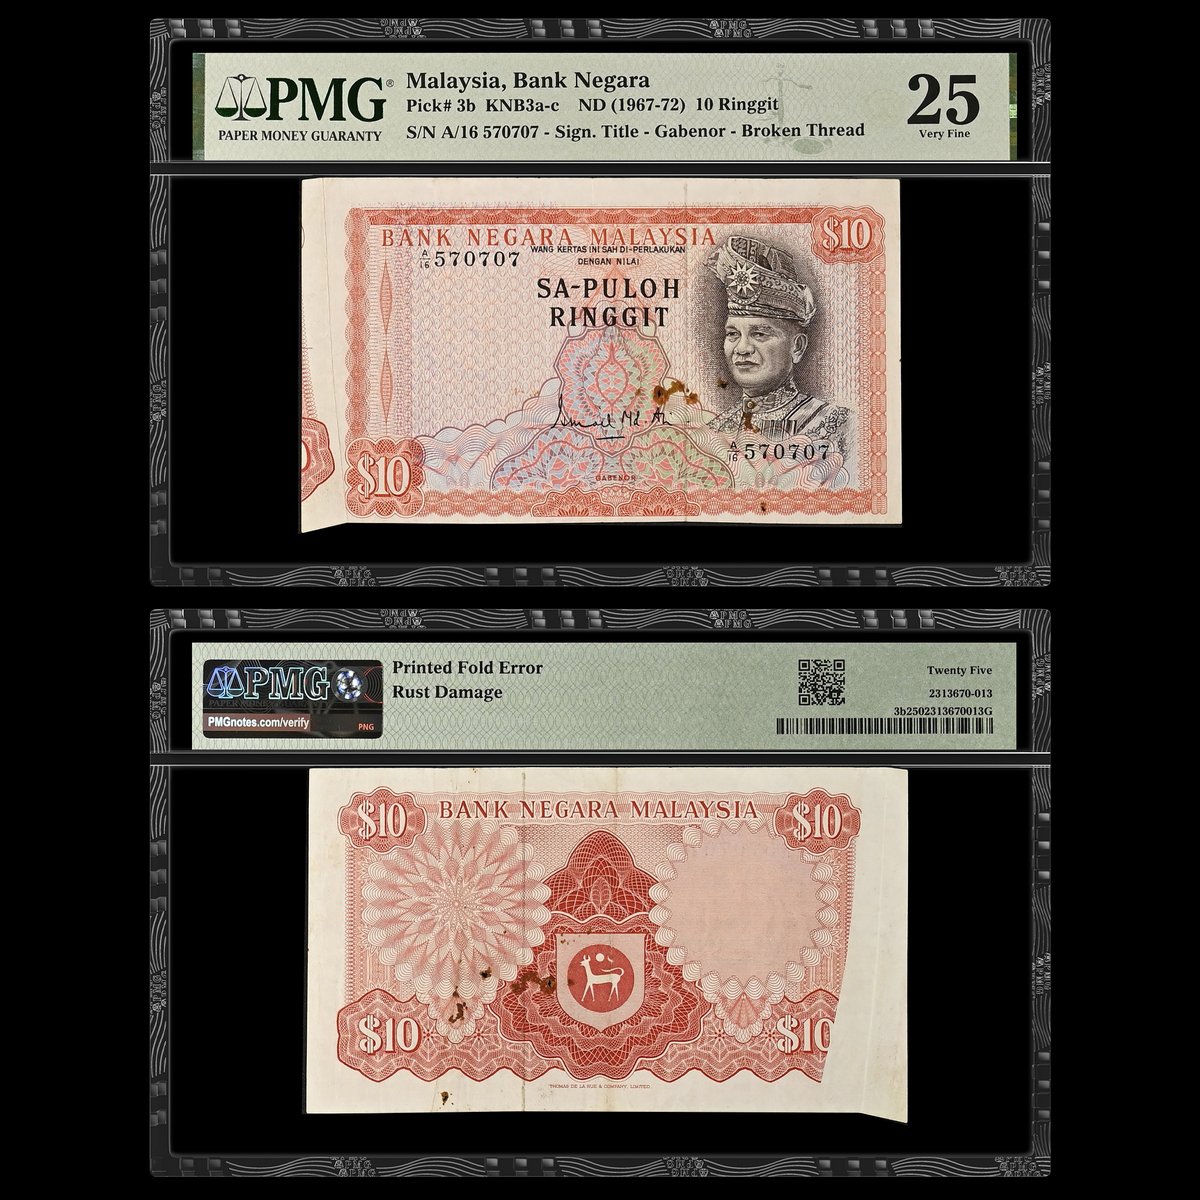 Note of the Day: Our featured banknote this #MistakeMonday displays a Printed Fold Error, which occurs when a banknote sheet is folded prior to printing. Take a look at this Malaysia, Bank Negara ND (1967-72) 10 Ringgit graded PMG 25 Very Fine.